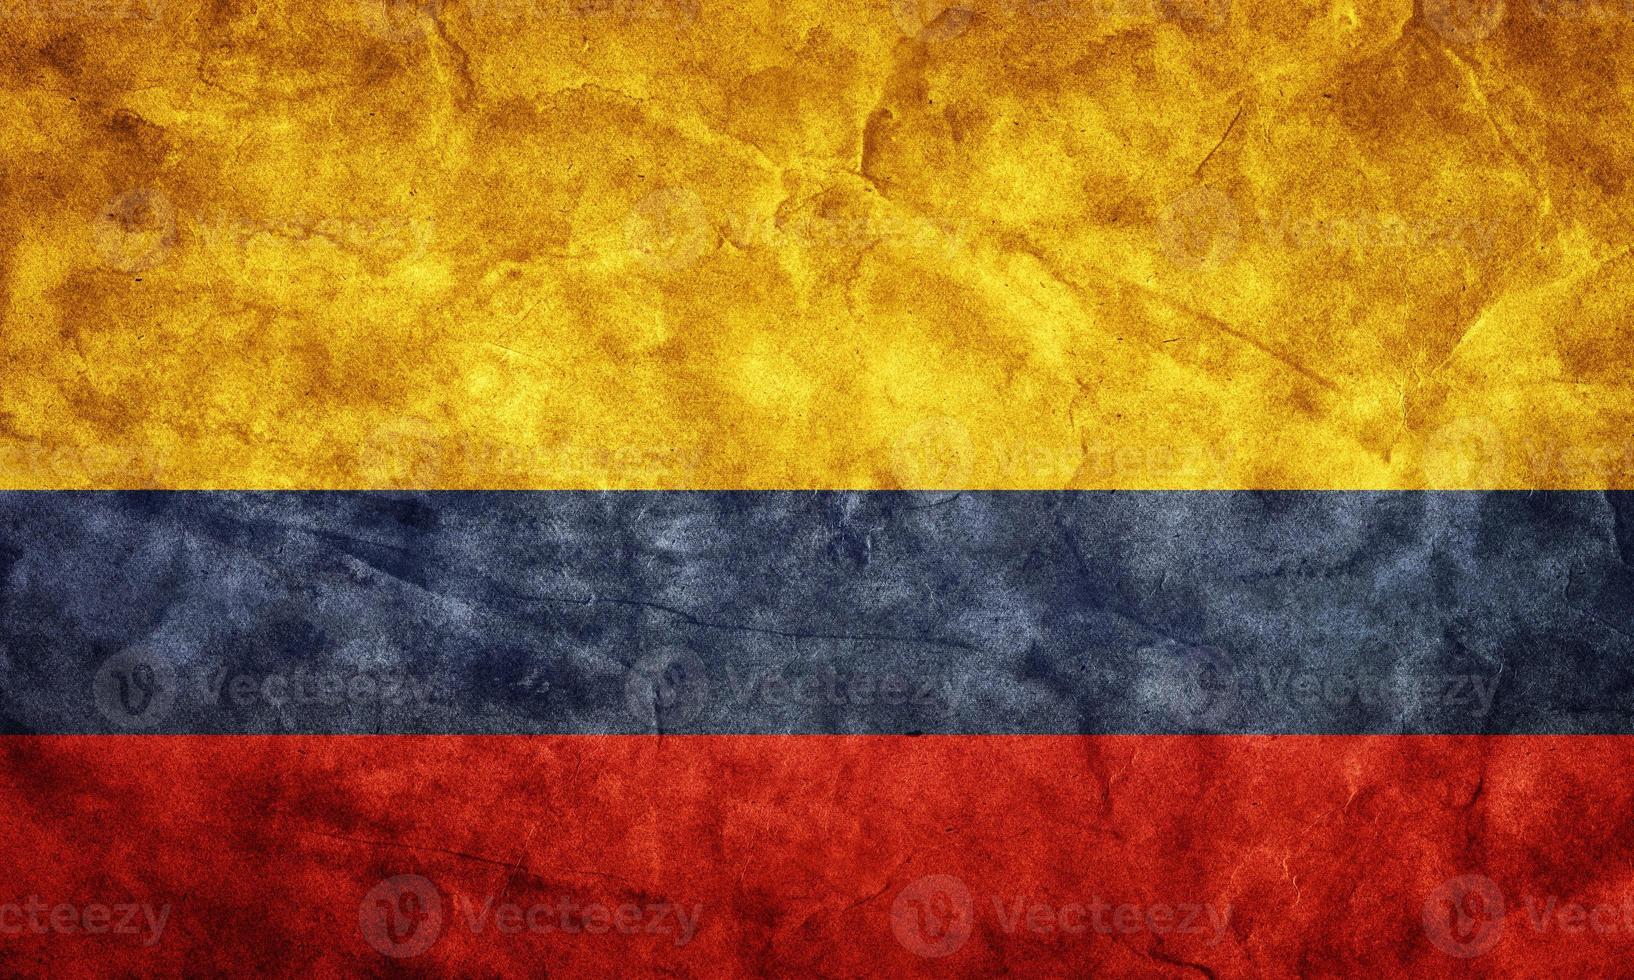 Colombia grunge flag. Item from my vintage, retro flags collection photo